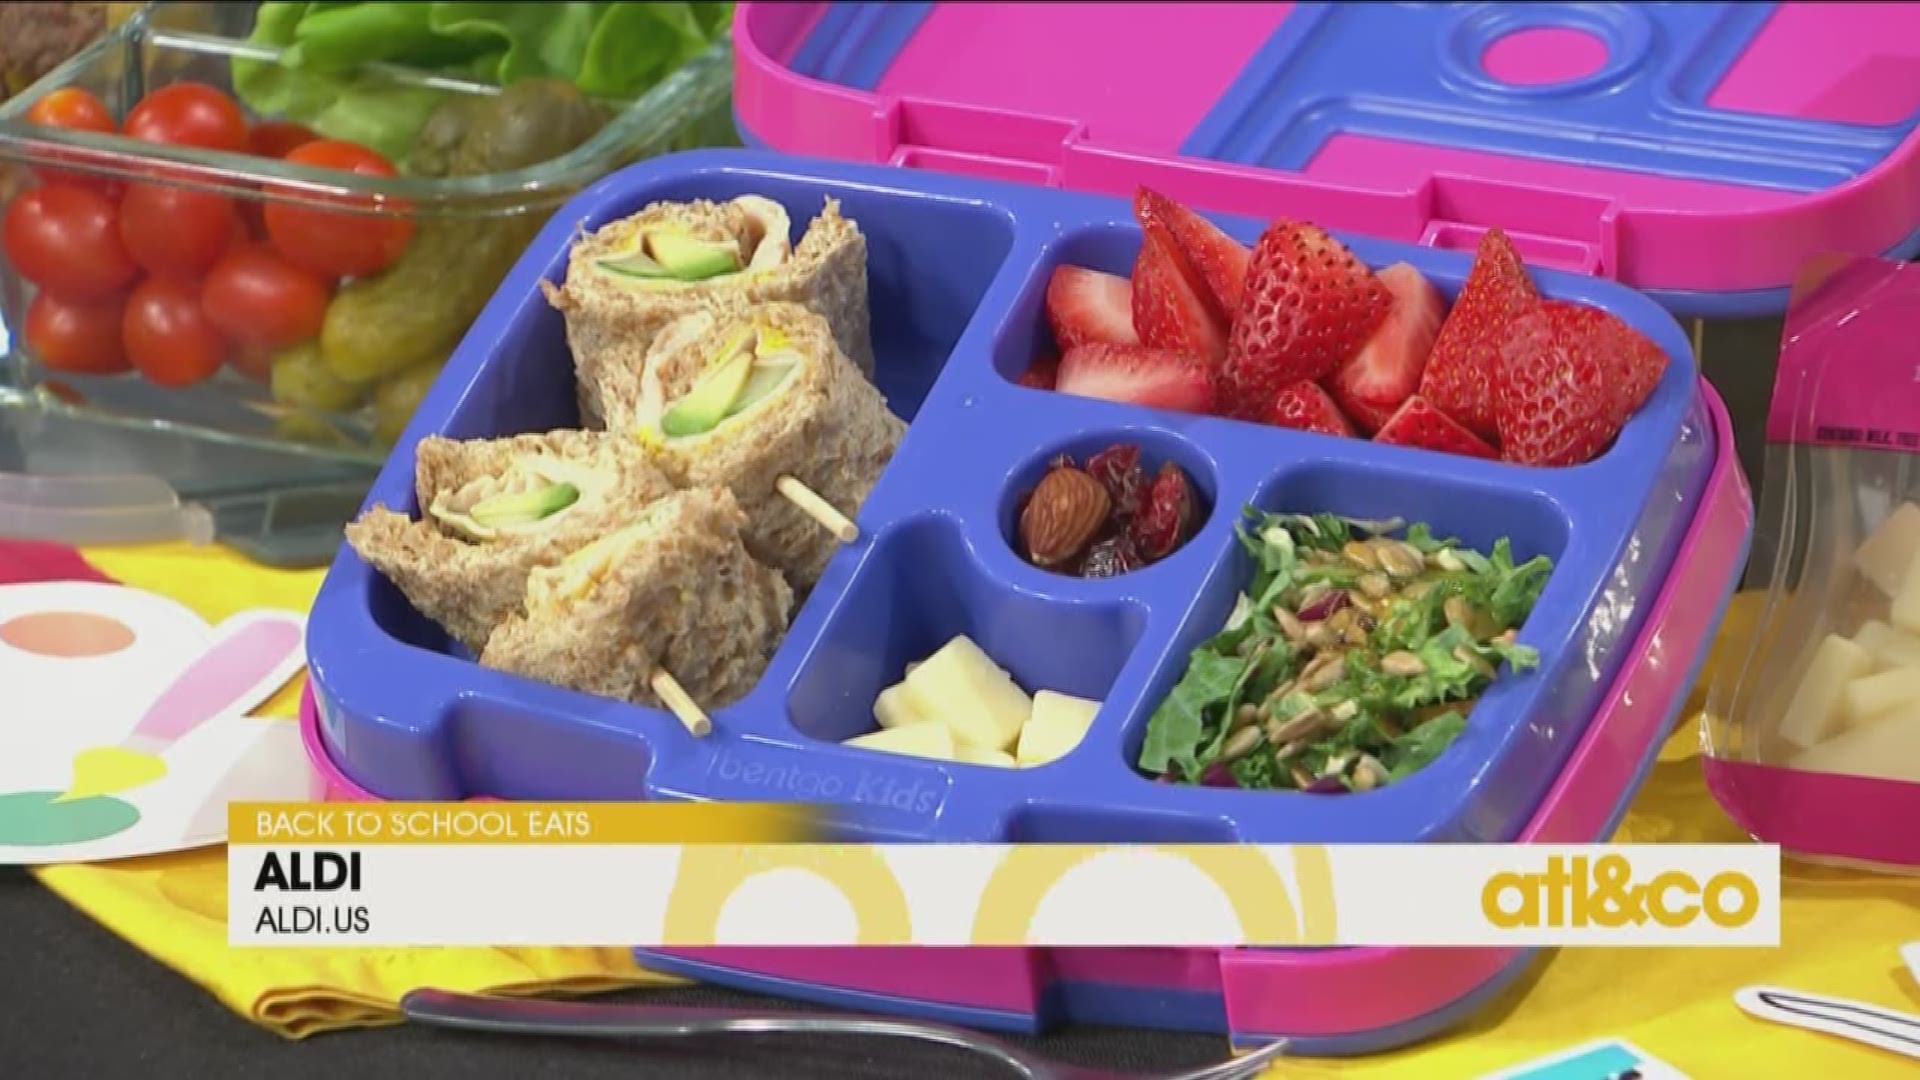 Holley Grainger shares fresh and healthy options for our kids from ALDI.